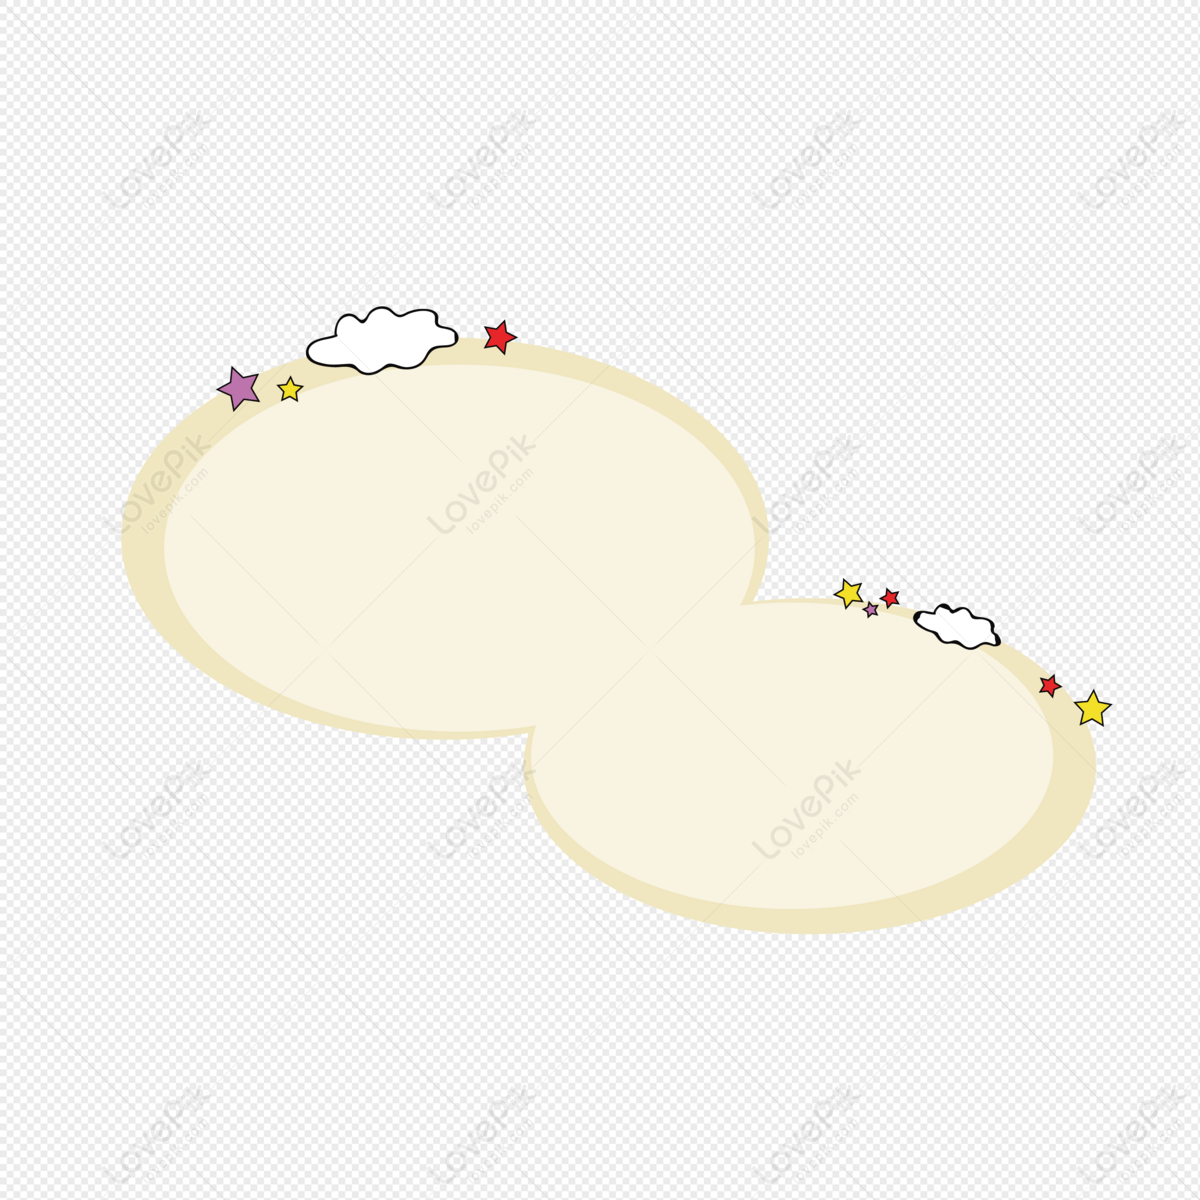 White Clouds Stars Border PNG Picture And Clipart Image For Free ...